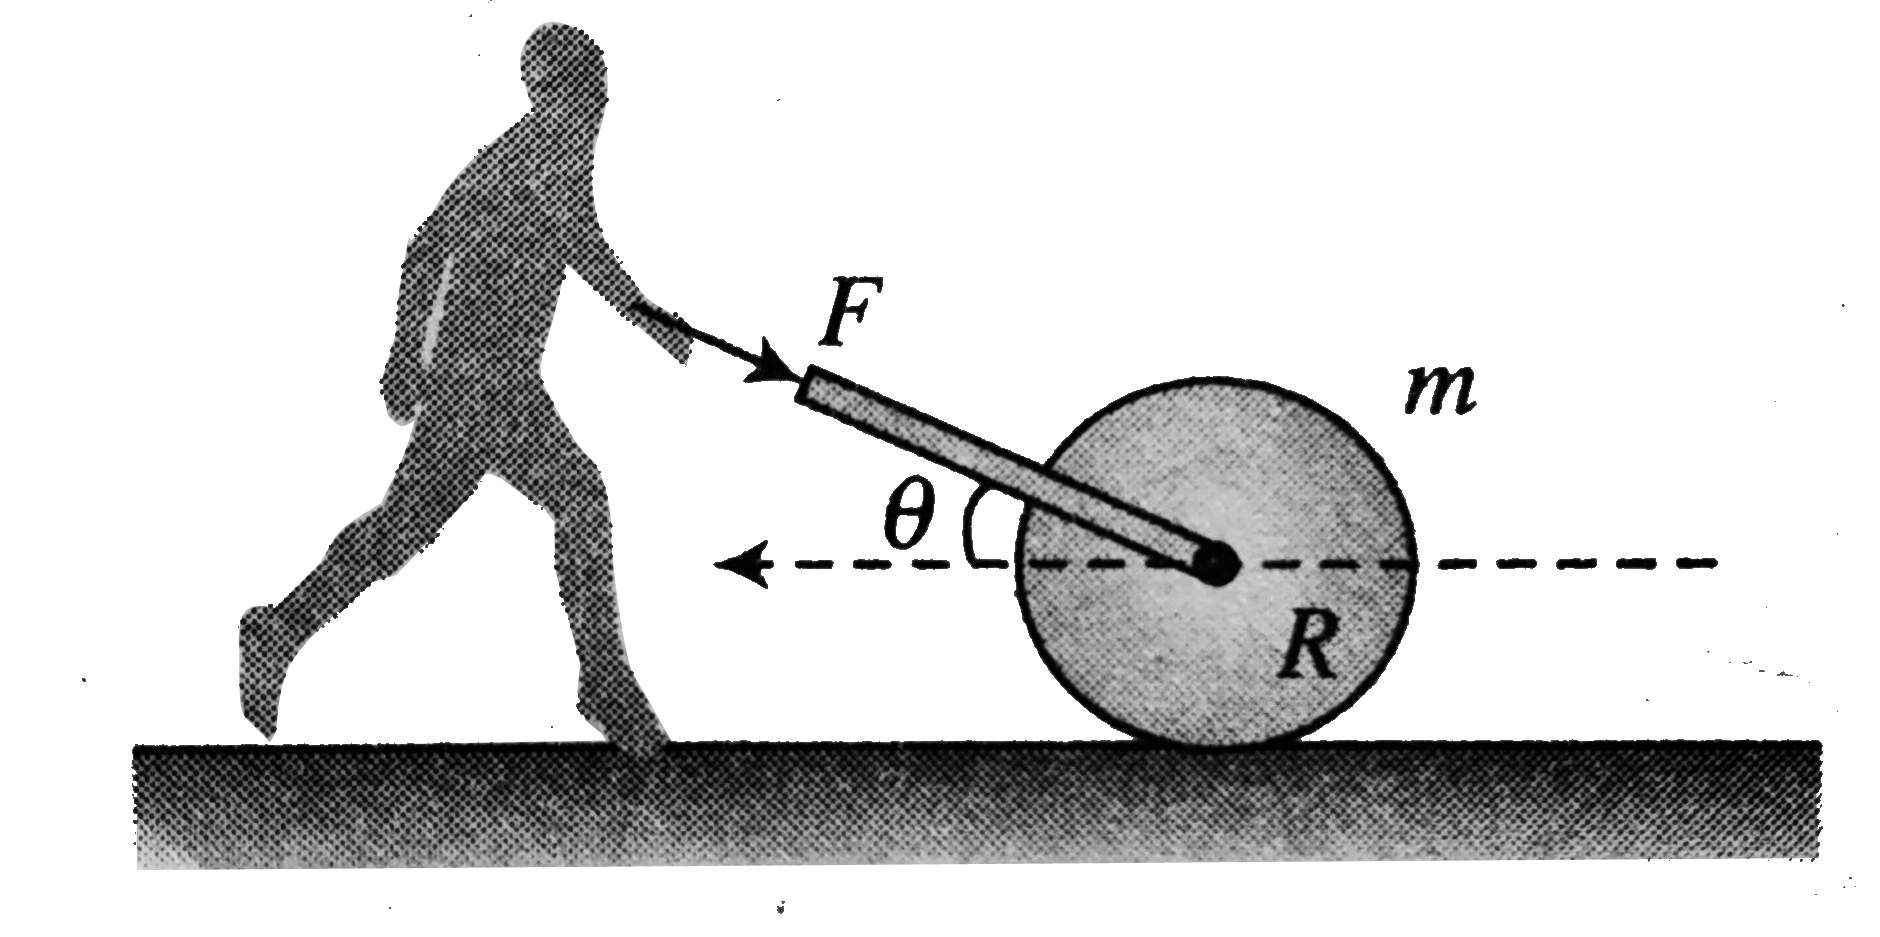 A gardener presses the grasscutter with a force F at an angle theta. Assume the motion of grasscutter as pure rolling. Find the:     Maximum force F for no relative slidng if th coeficient of friction between the roller and ground is mu